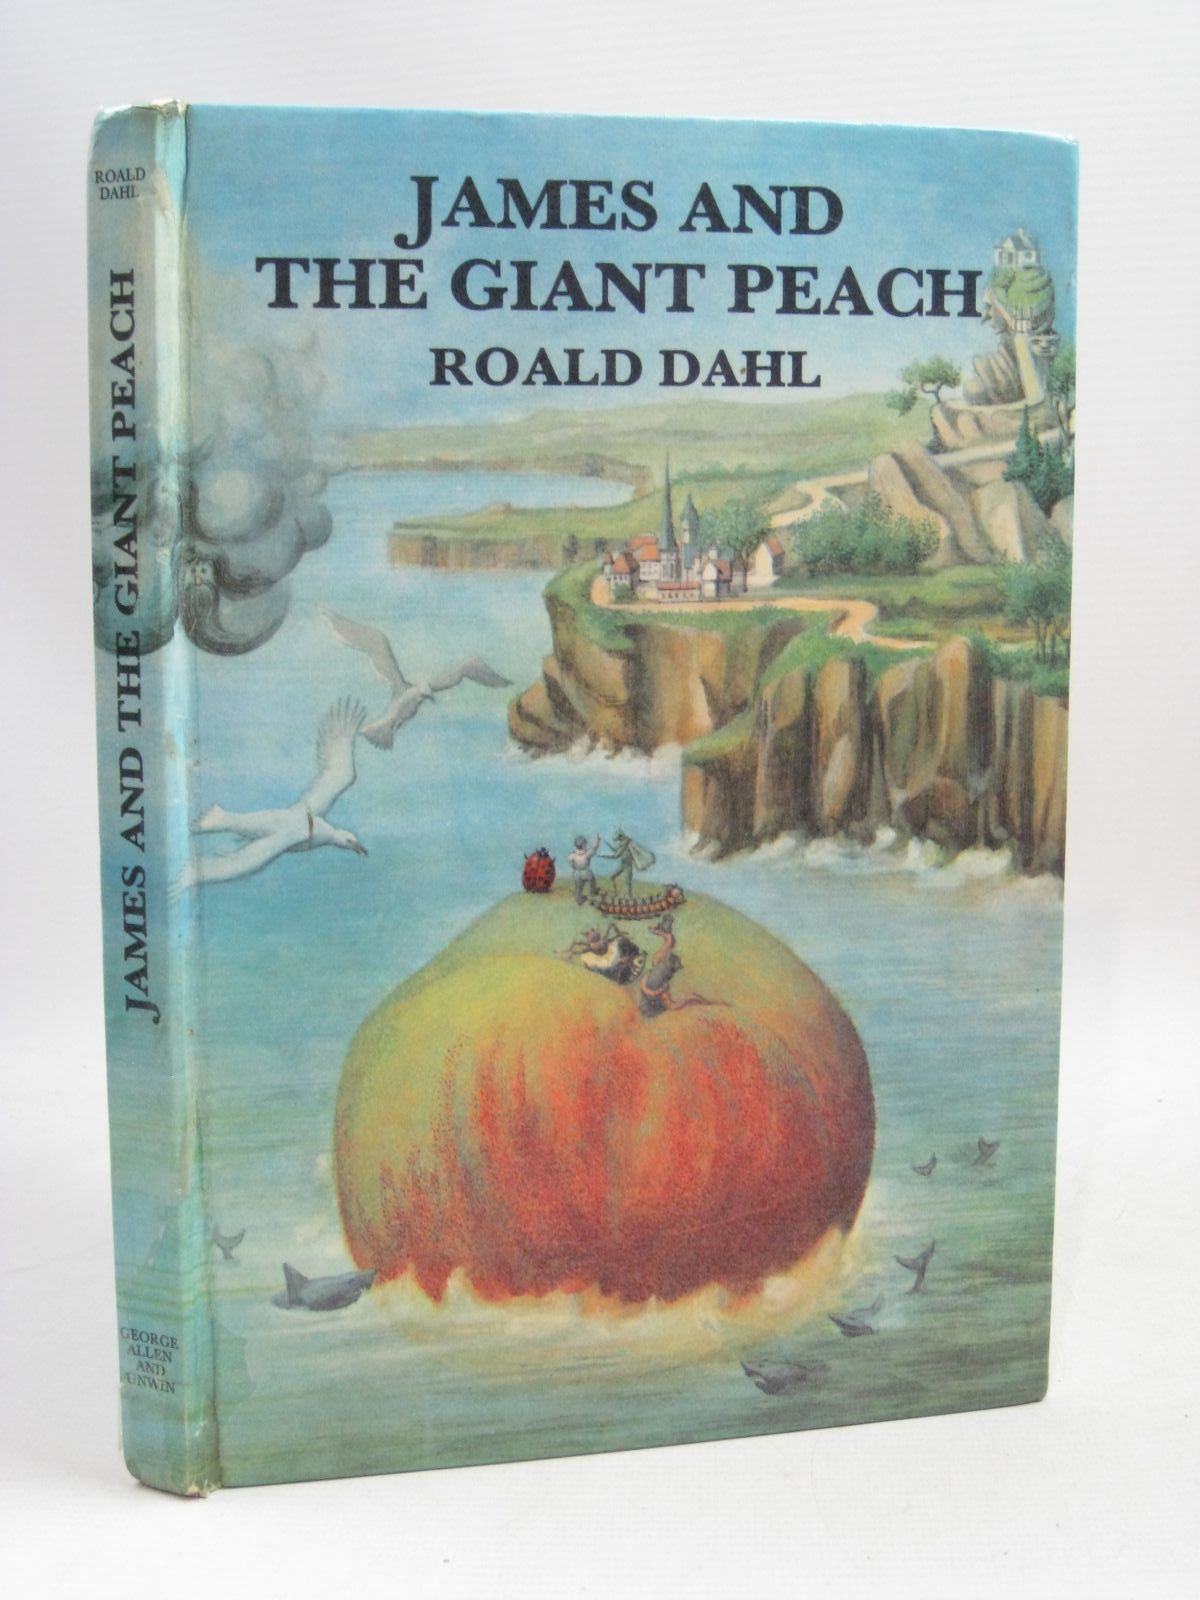 Cover of JAMES AND THE GIANT PEACH by Roald Dahl